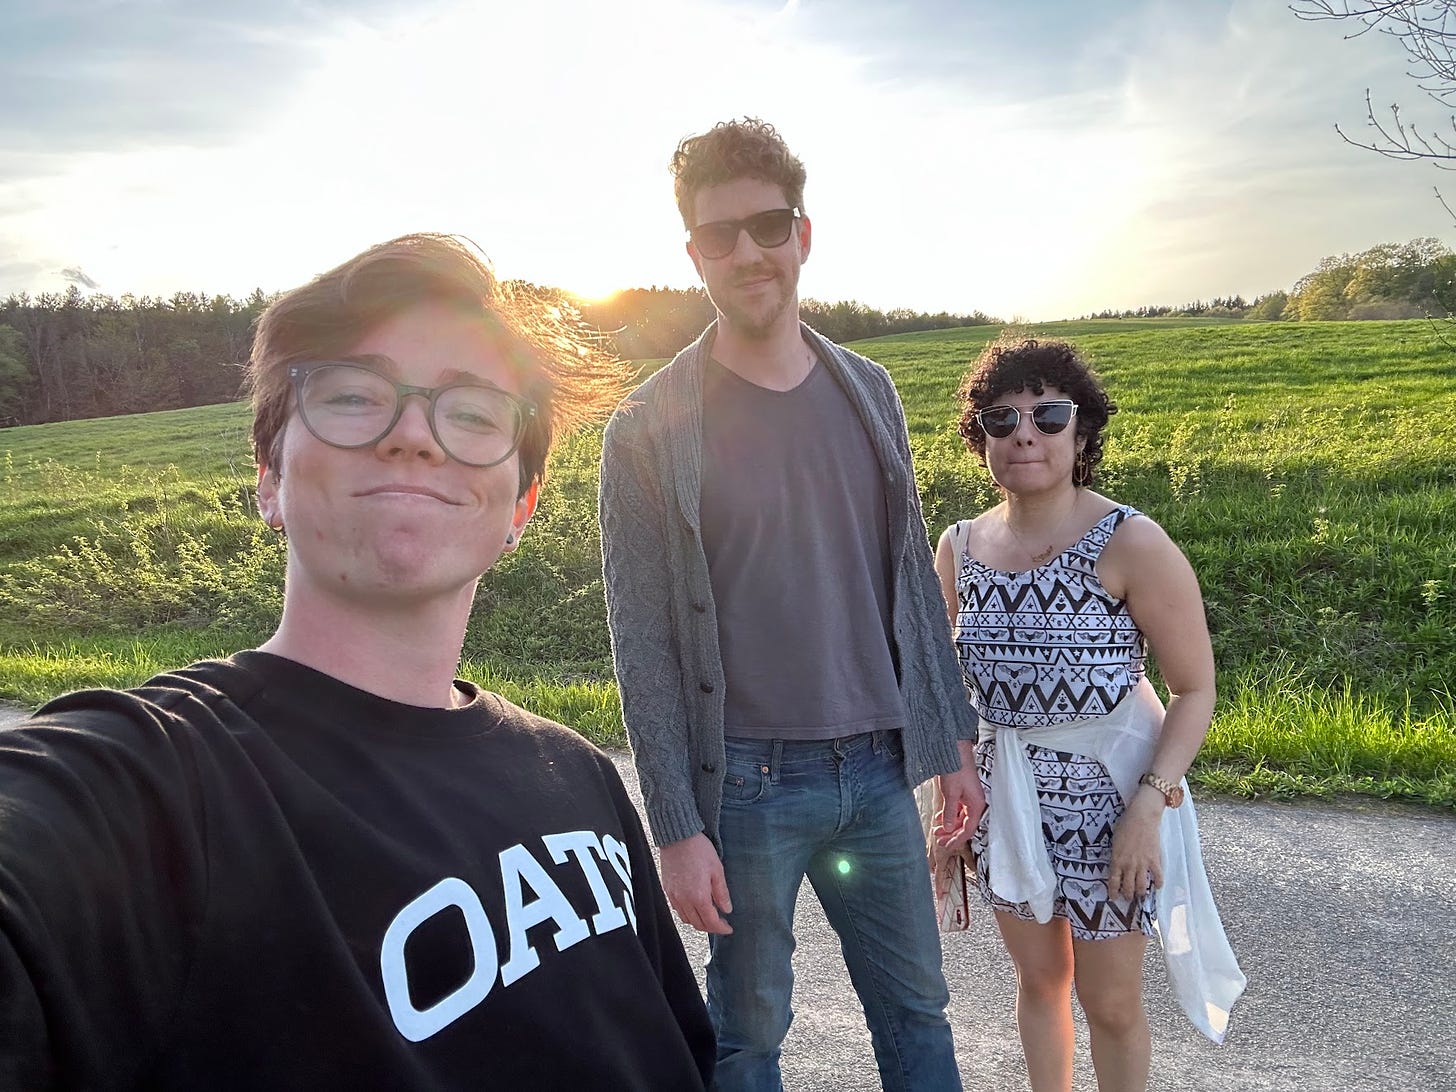 Three people smile at the camera standing on a paved road in front of a field of grass where the sun is setting